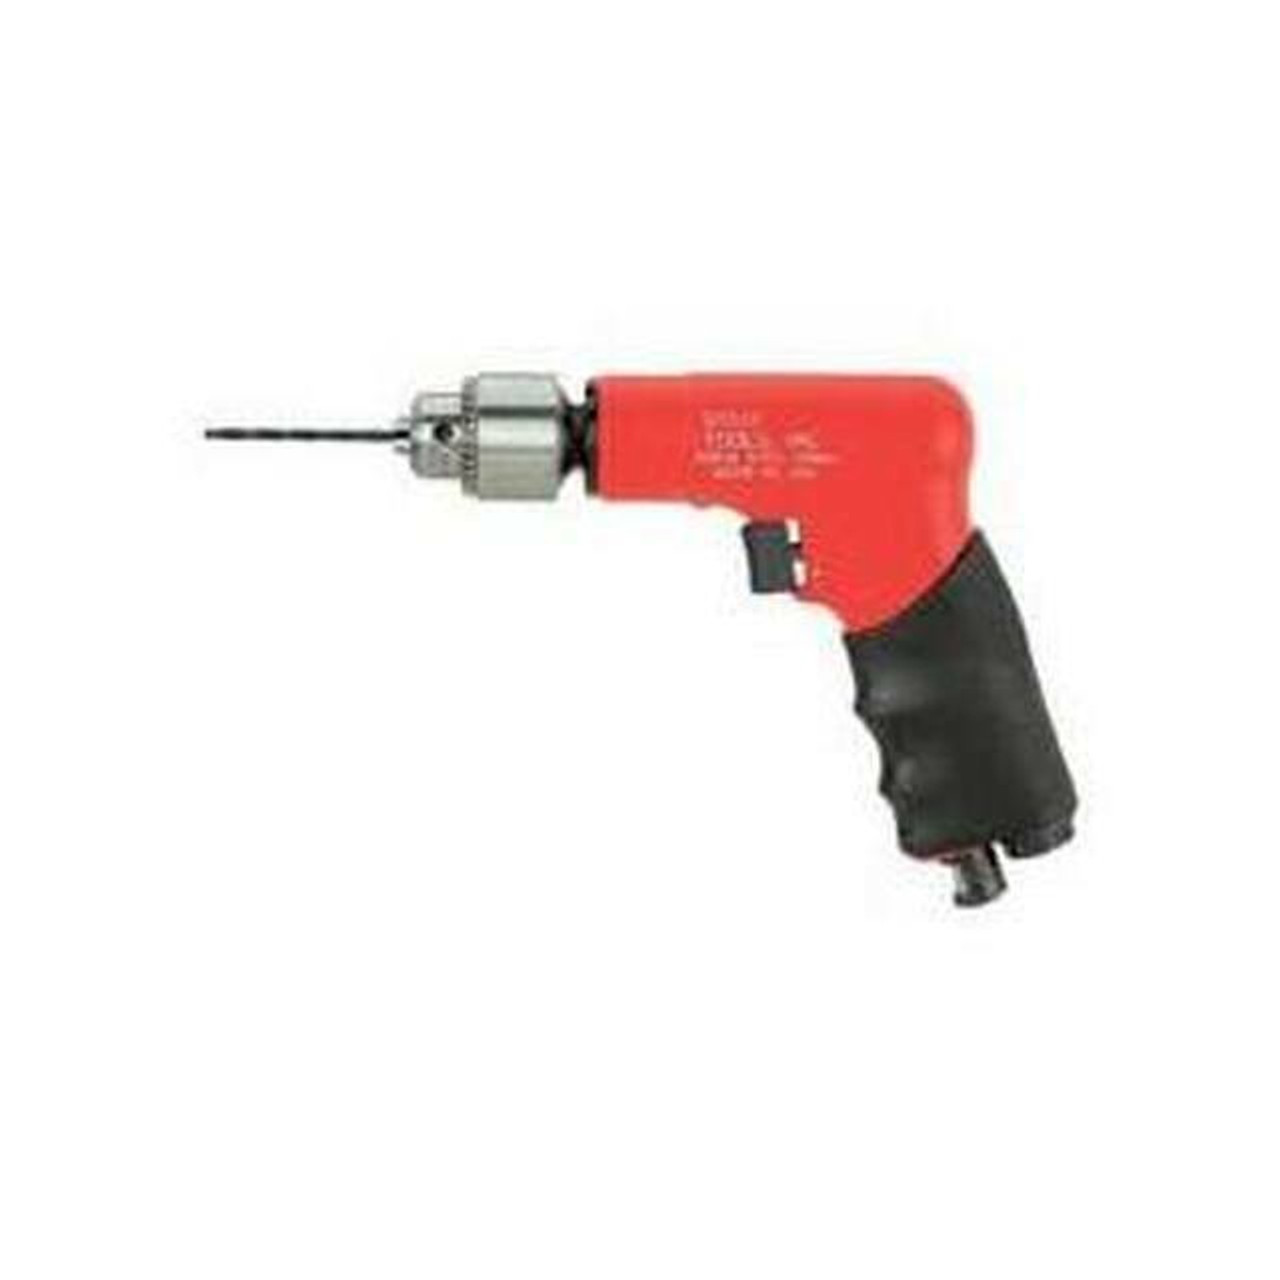 Sioux Tools SDR10P7N3 Non-Reversible Pistol Grip Drill or 1 HP or 700 RPM or 3/8 Keyed Chuck